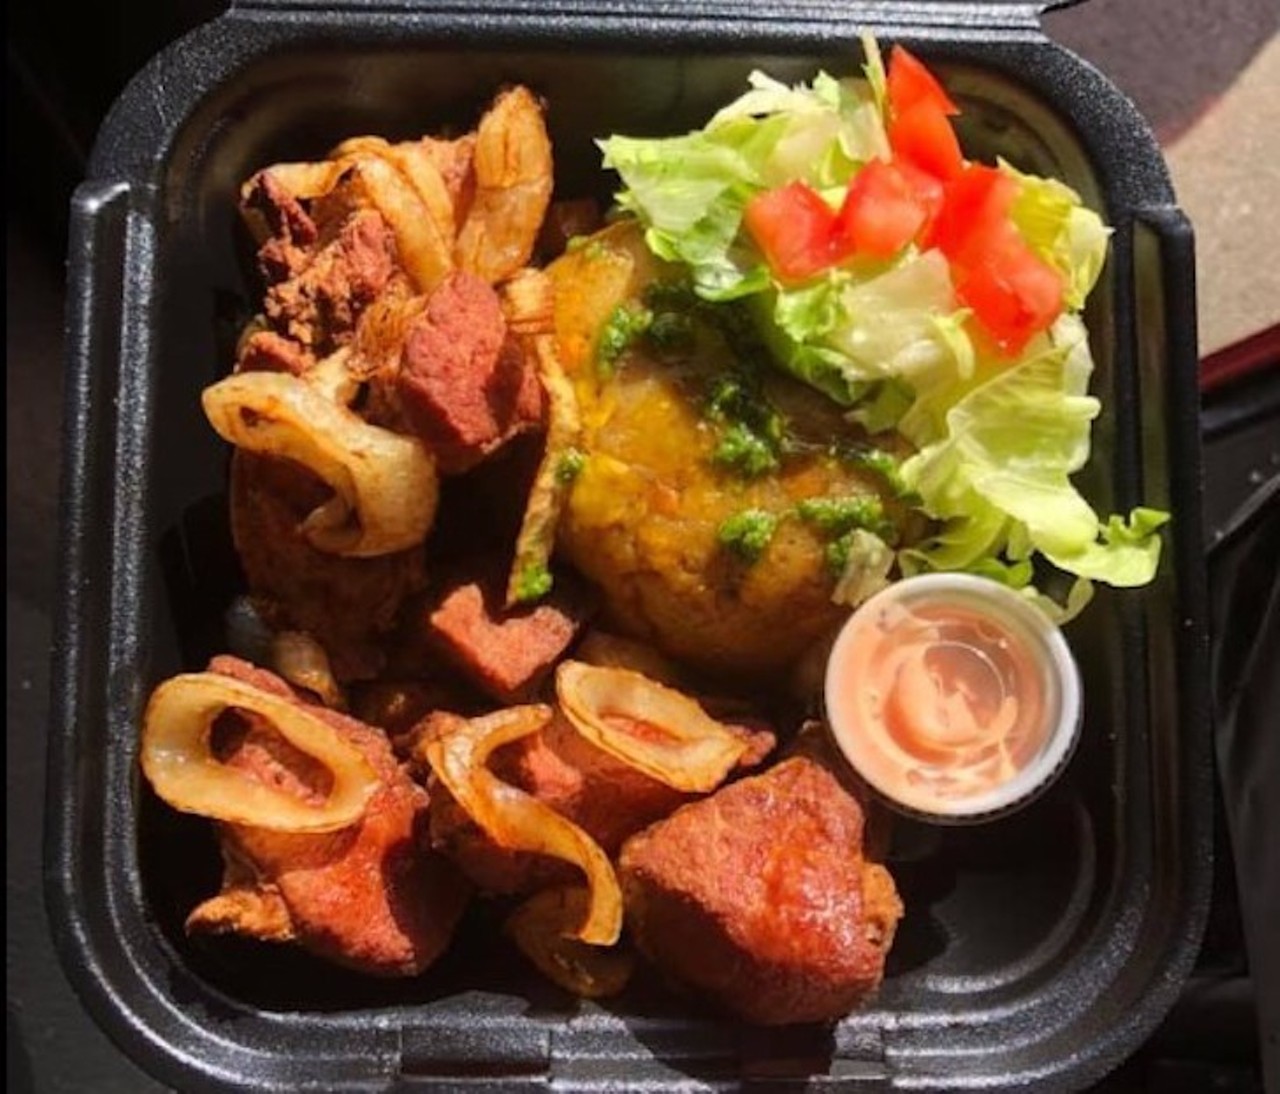 Antojitos Boricua 
477 FL-50 Clermont, (407) 497-5849
Owner and cook Jos&eacute; will be laughing and joking around with you as he makes sure you get some good grub from his friendly food truck. He says the idea of Antojitos Boricuas is to bring the Puerto Rican kitchen to its fullest expression. &#147;Antojitos&#148; translates into &#147;cravings,&#148; so don&#146;t expect rice and beans here. These are &#147;picaderas,&#148; finger foods for the most part. Chicharr&oacute;n de pollo, carne frita, mofongo, empanadillas de todas clase con carne, pollo, queso, camarones, tambi&eacute;n tostones, alcapurrias, sandwiches boricuas como las tripletas y mucho m&aacute;s! Come and give yourself a gustito and jamp&eacute;ate a bunch of these little antojitos - with a Heineken, of course. 
Photo via Antojitos Boricuas/Facebook